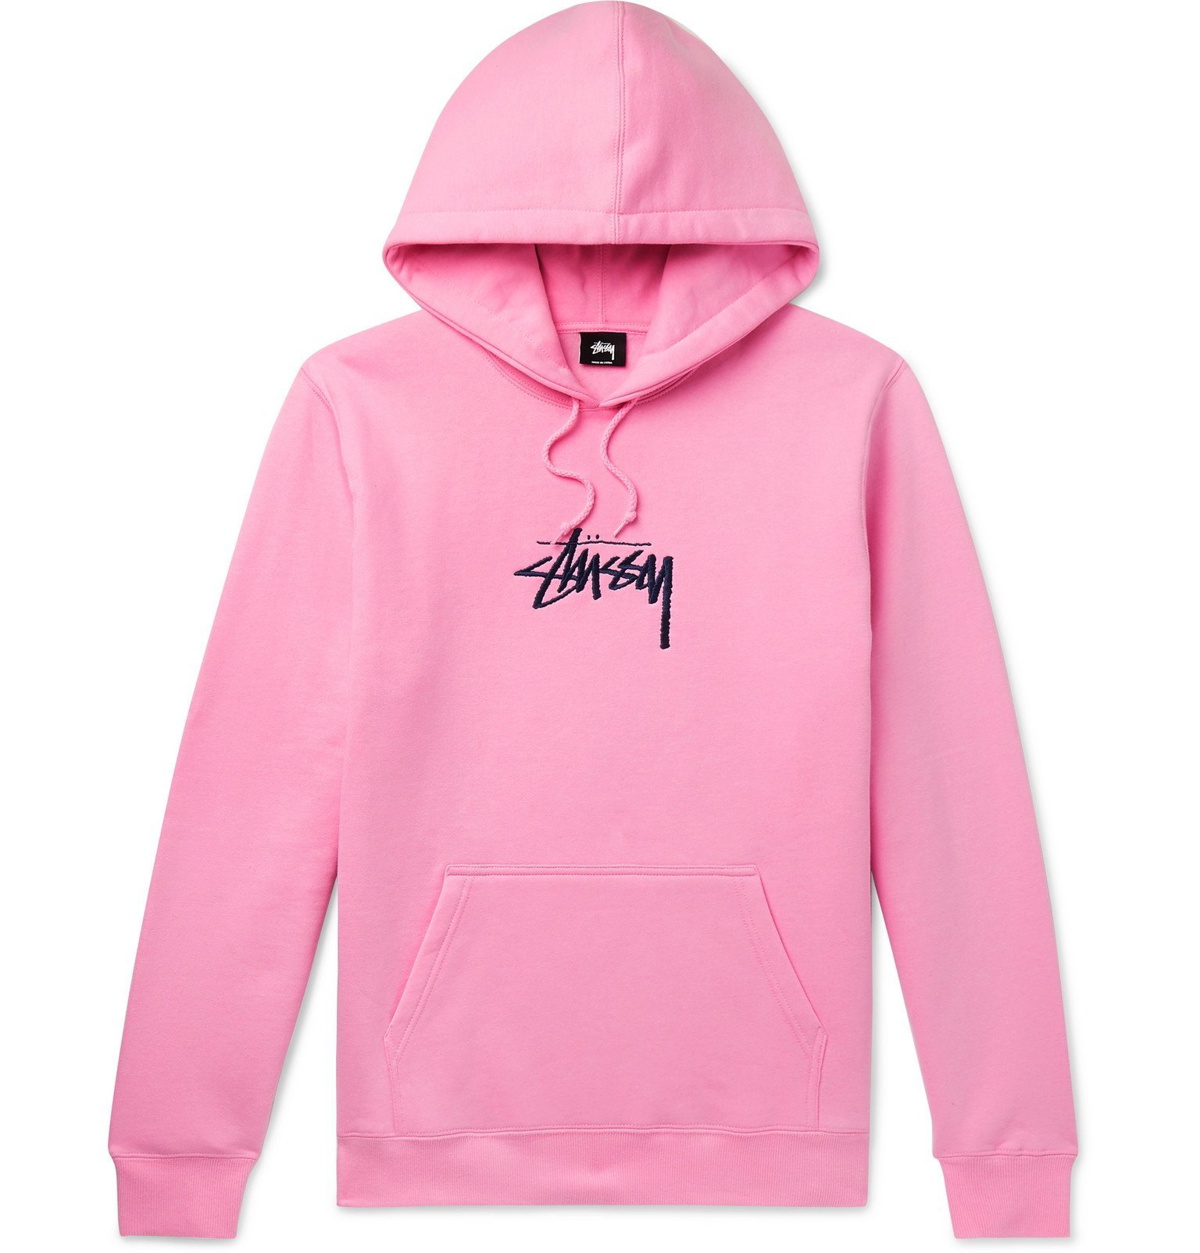 Stussy Back Hood Embroidered Hoodie Stone in White for Men